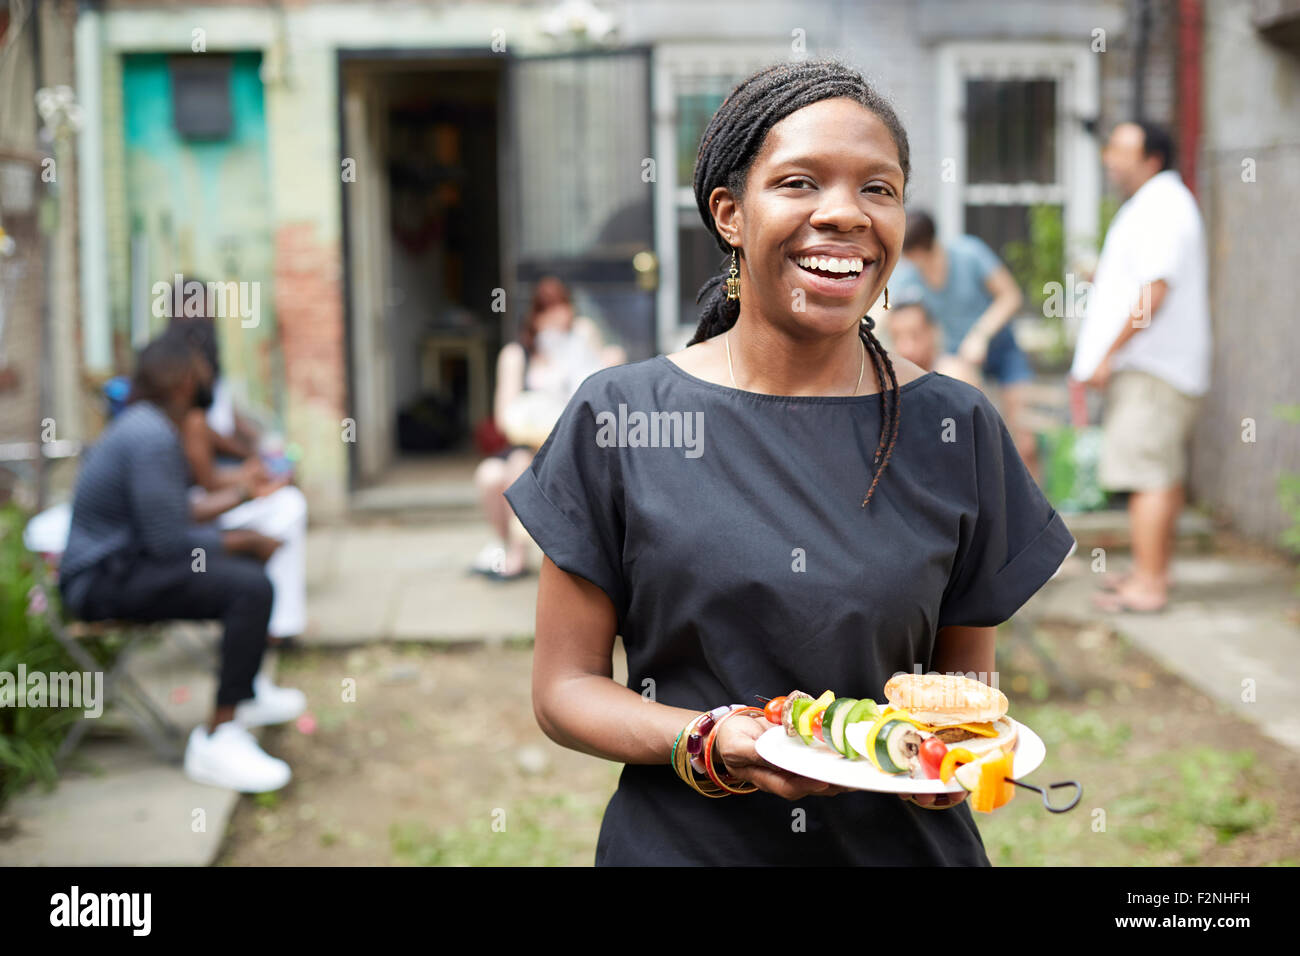 African American woman eating at backyard barbecue Stock Photo